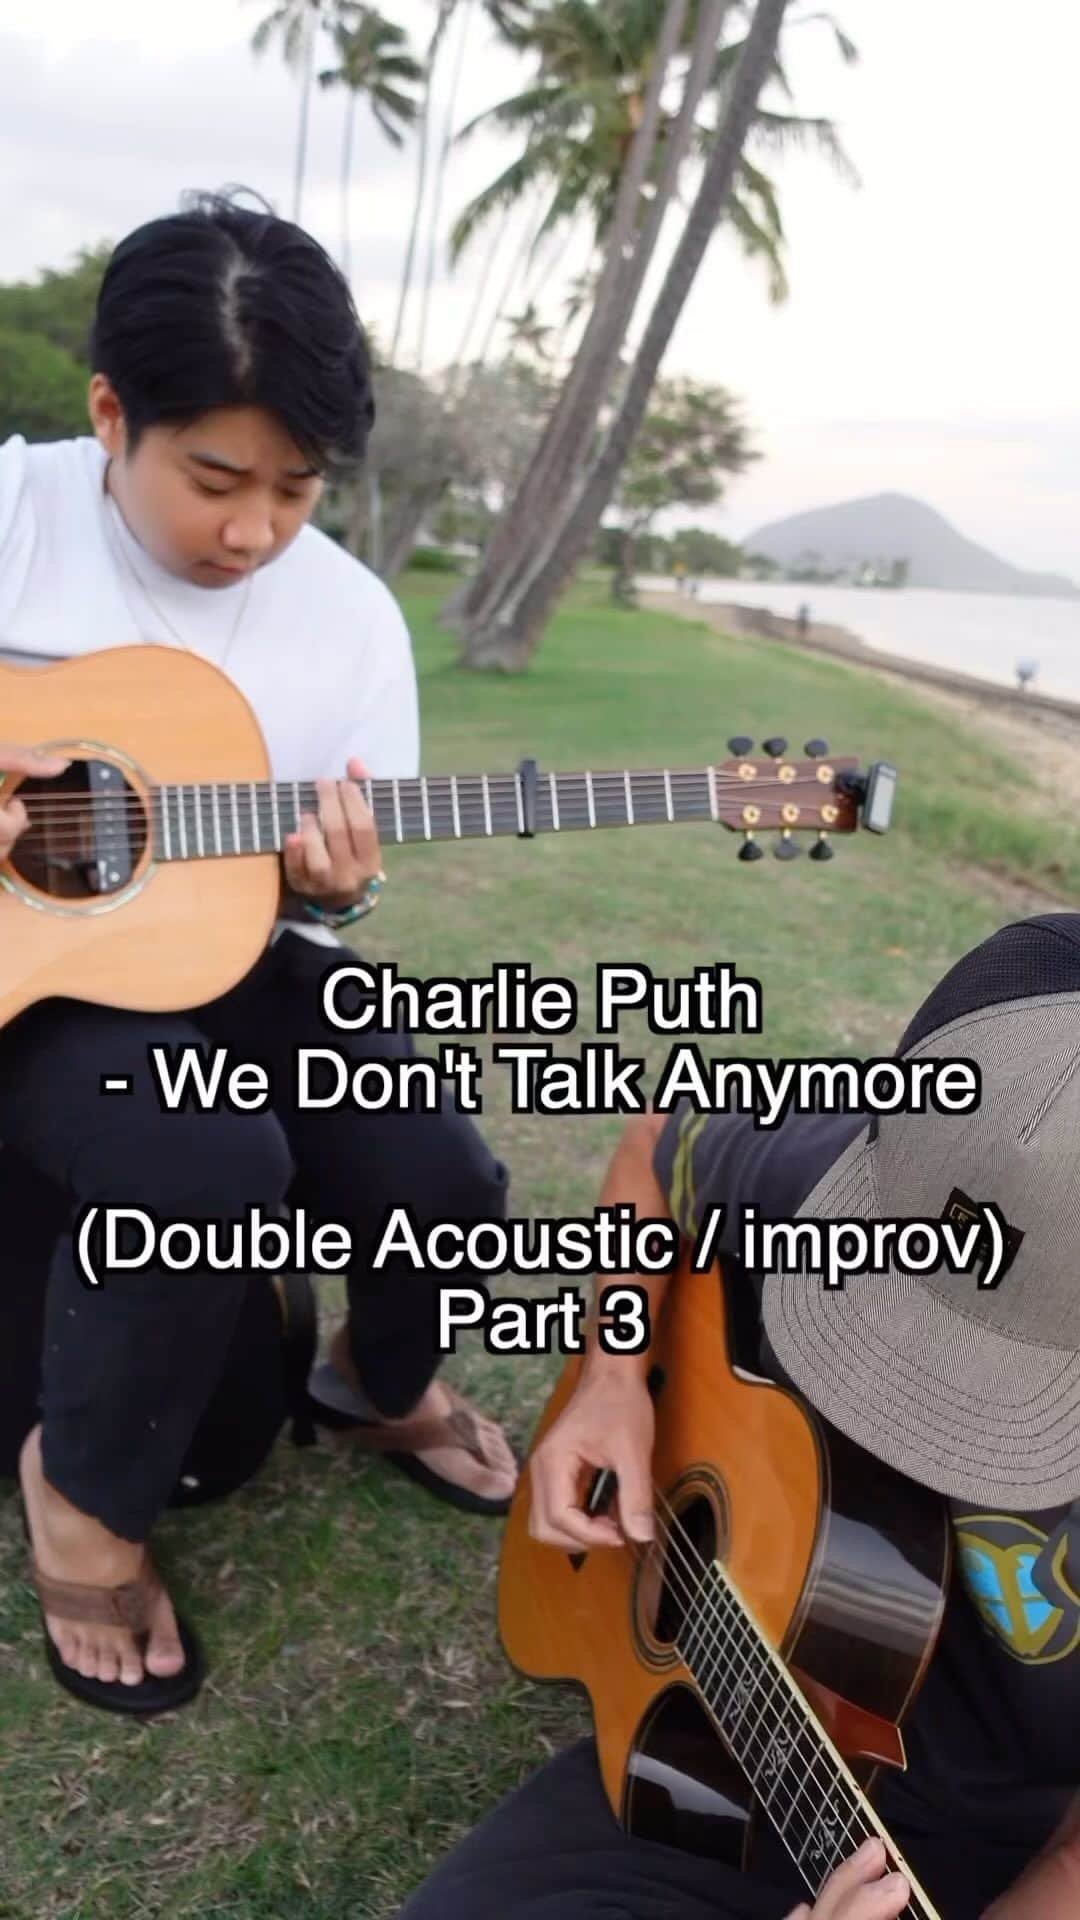 Eden Kaiのインスタグラム：「Charlie Puth feat. Selena Gomez⁣ - We Don’t Talk Anymore ⁣ ⁣ Double Acoustic Guitar Improv Cover ⁣ with Shin Kawasaki (Part.3)⁣ ⁣ ⁣ ⁣ #charlieputh #selenagomez #wedonttalkanymore #acousticguitar #fingerstyle」